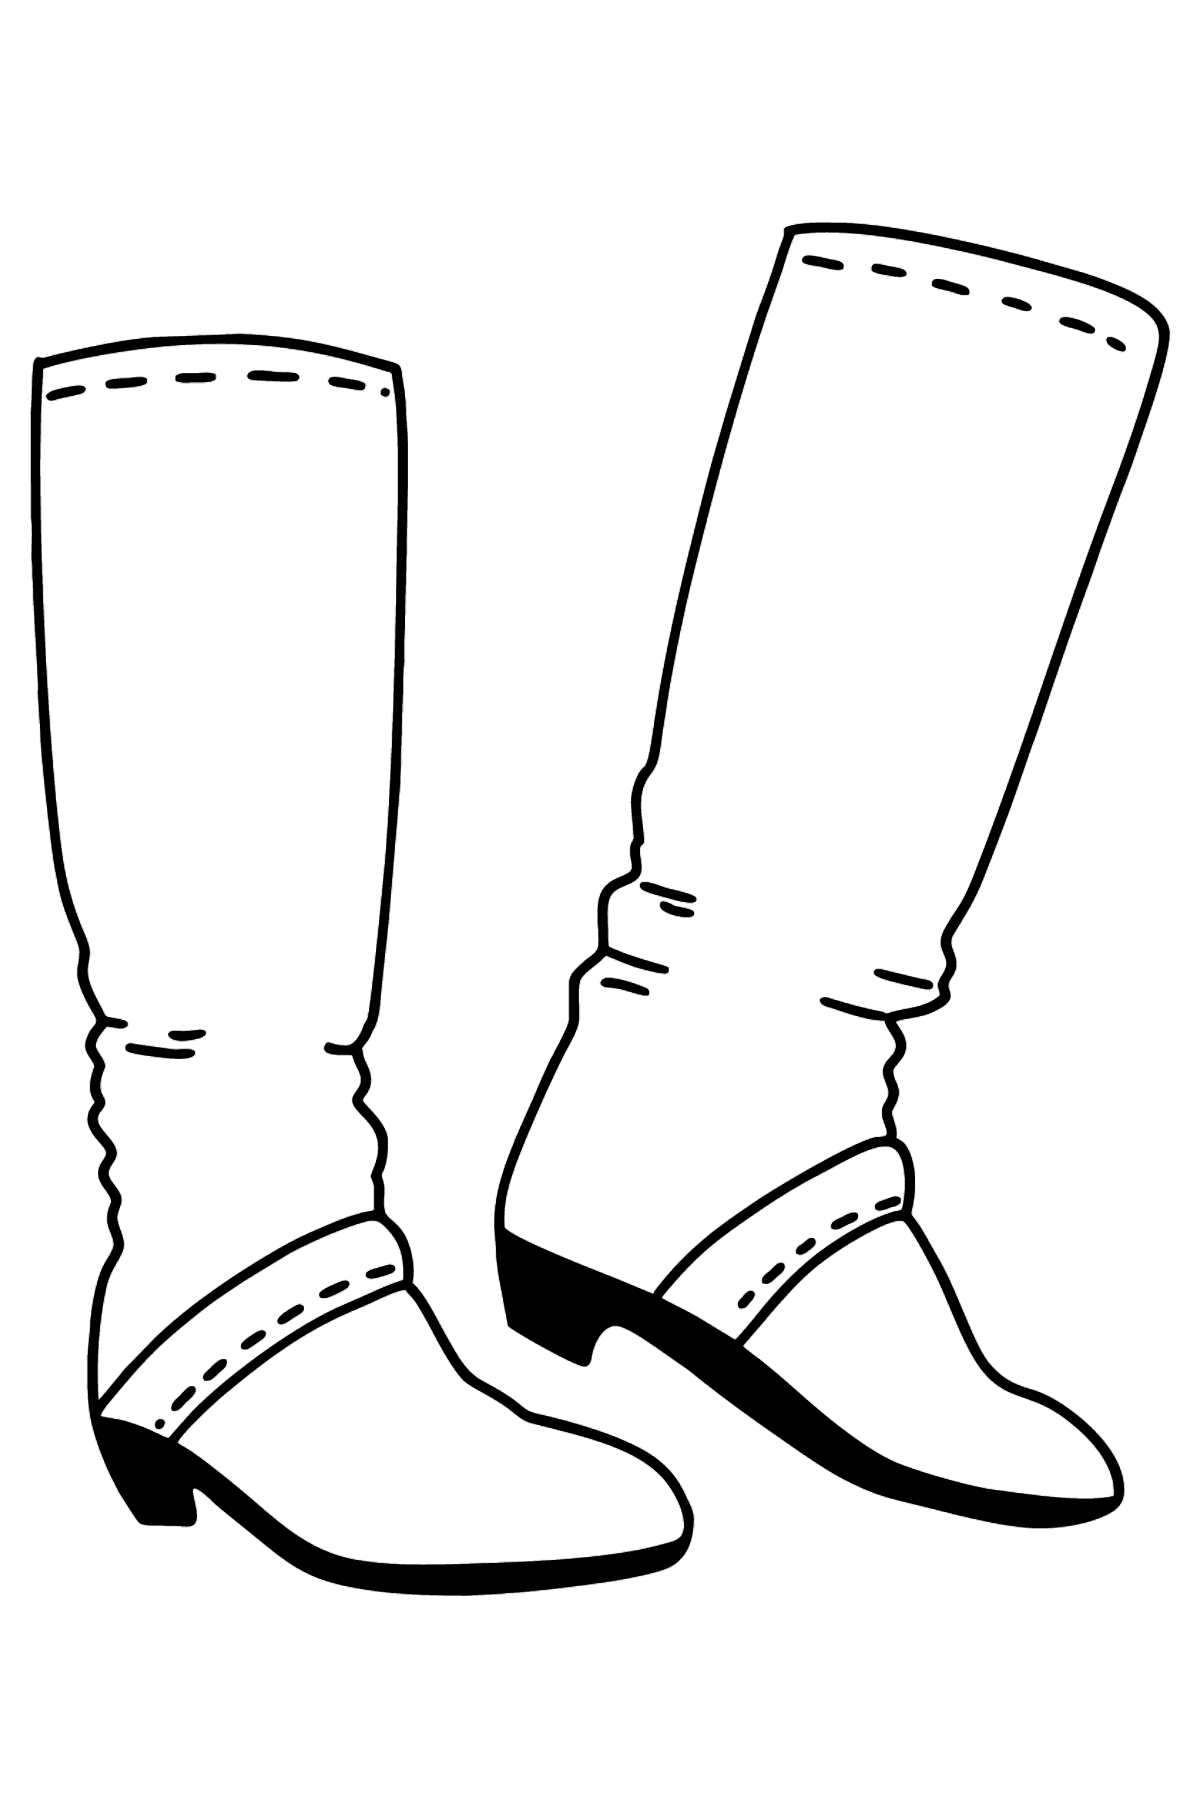 Boots coloring page - Coloring Pages for Kids